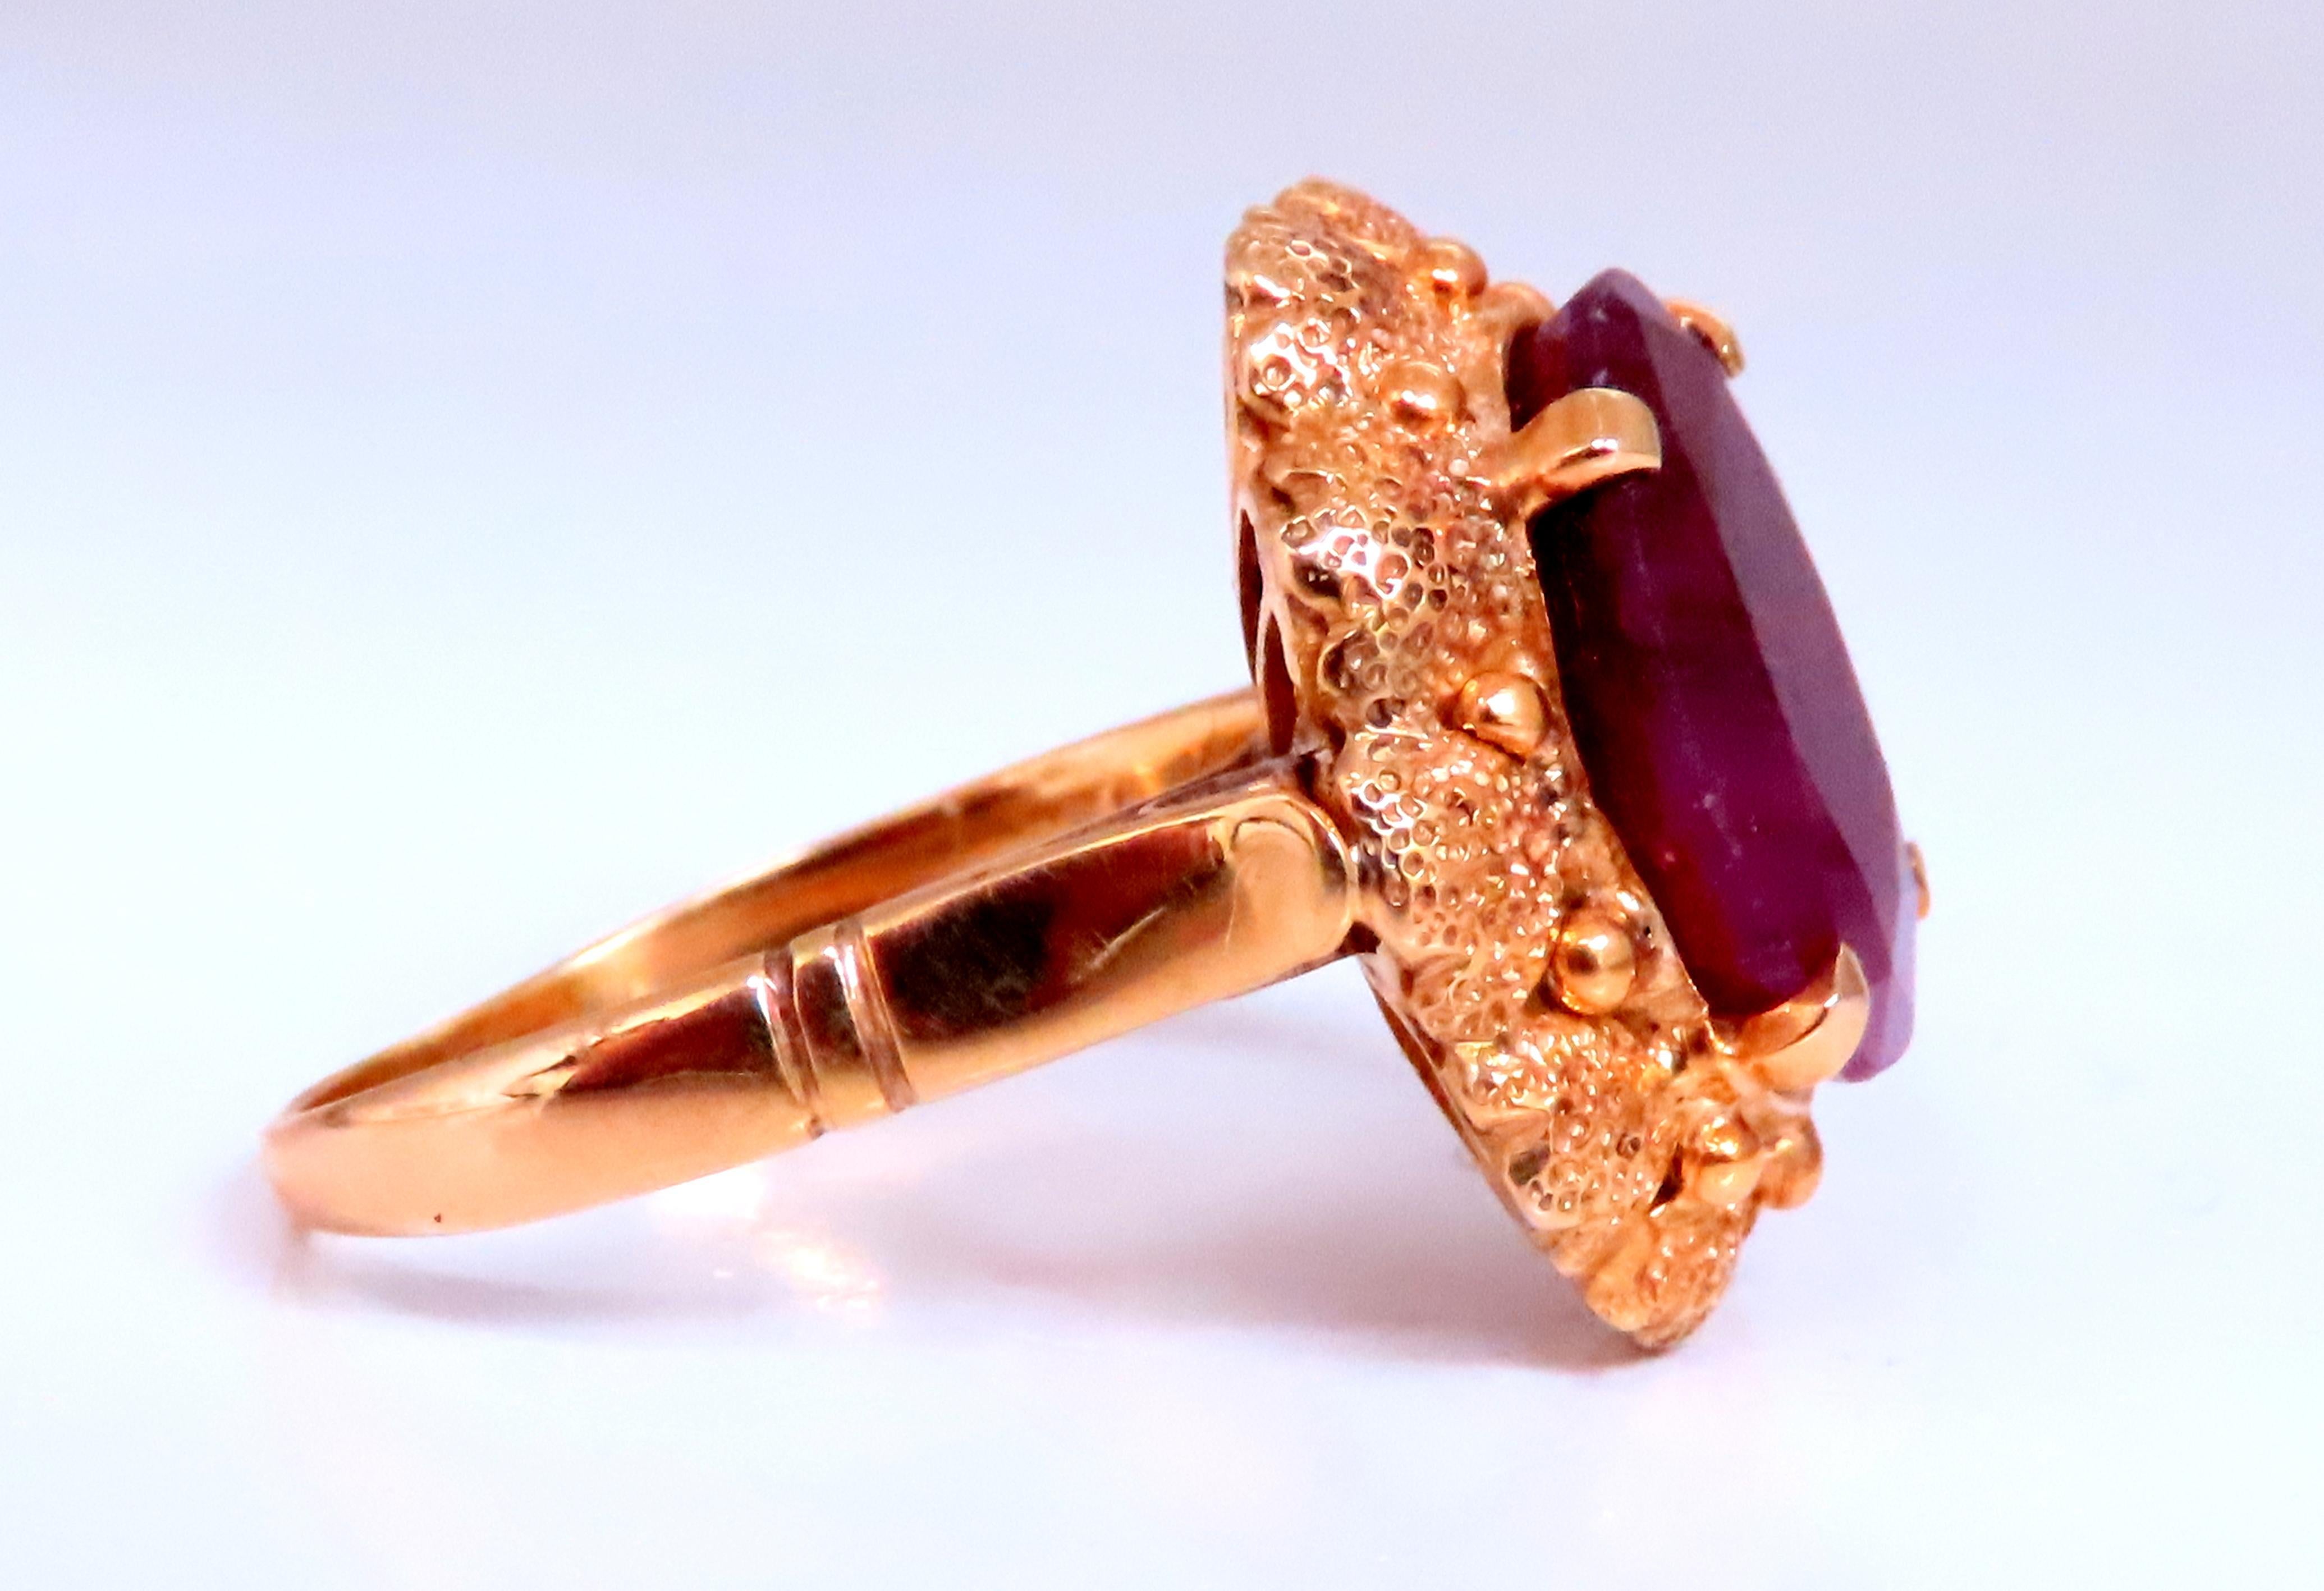 7ct Natural Ruby Ring.
Oval Cut Translucent
13 x 10mm
14kt. gold
Size 7.25
Deck: 19 x 17mm
Depth: 8.8mm
6 Grams